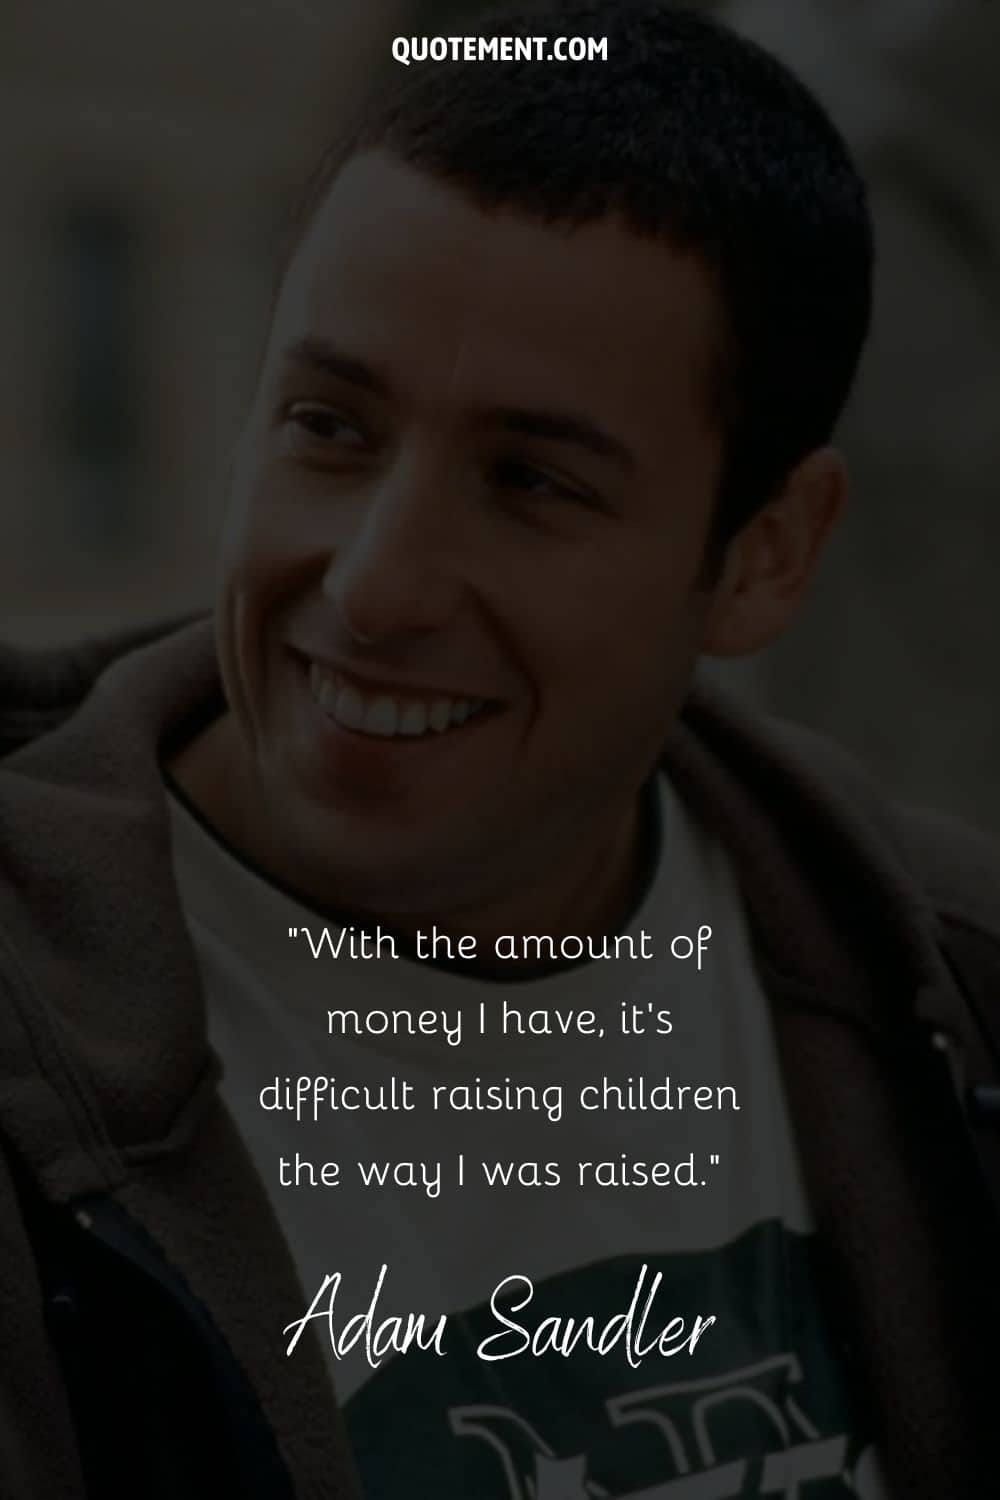 Adam Sandler quote on a background with his image